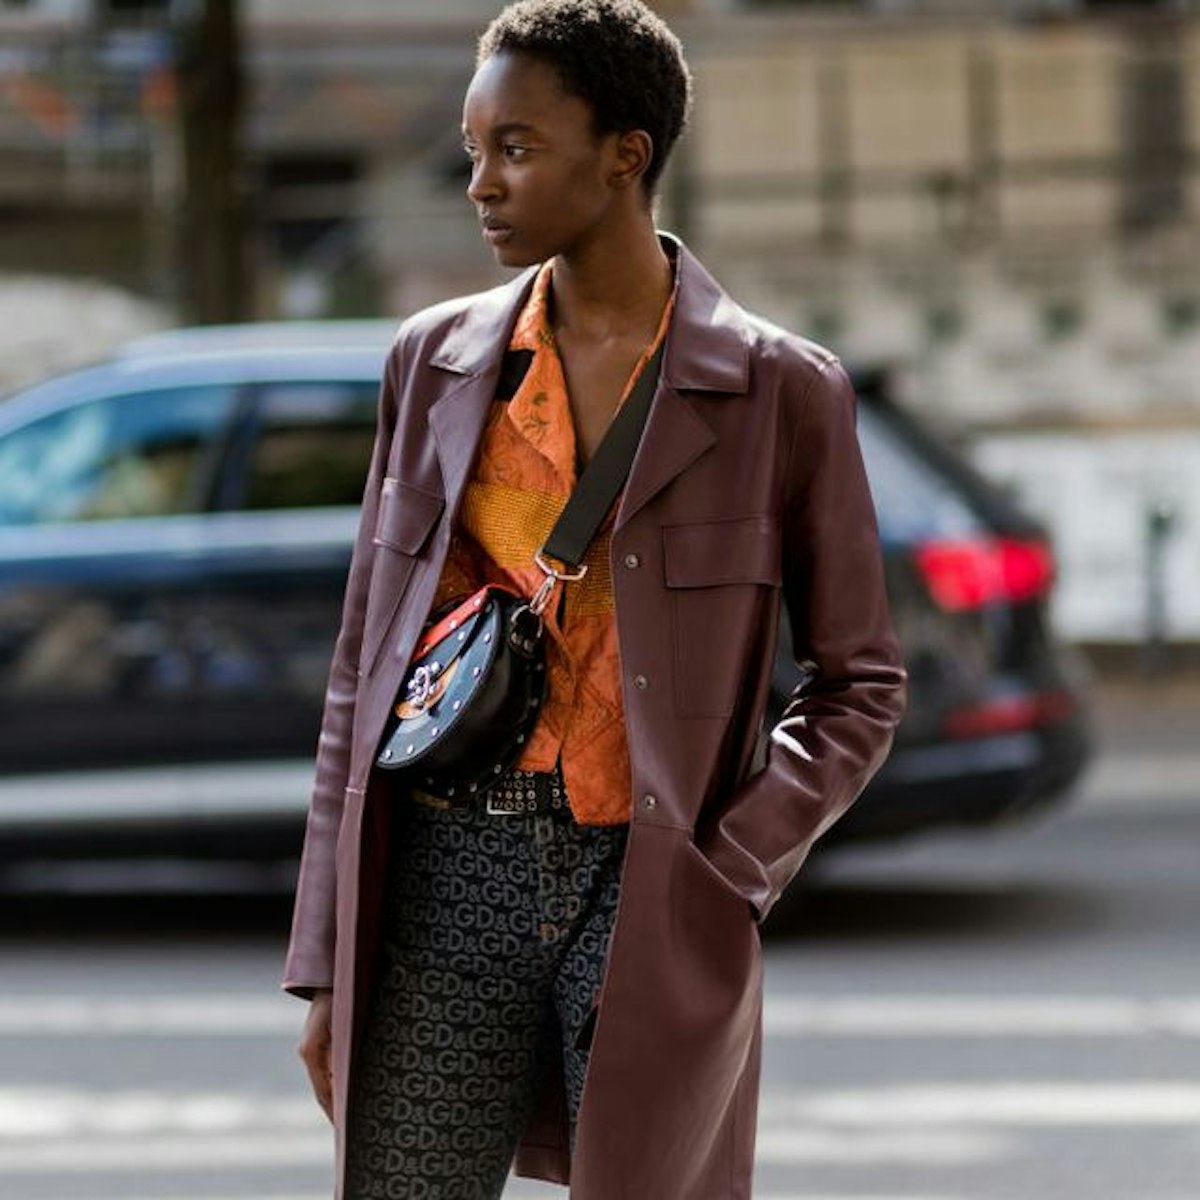 How To Wear The Cross-Body Bag — The Fashion Week Trend That Just